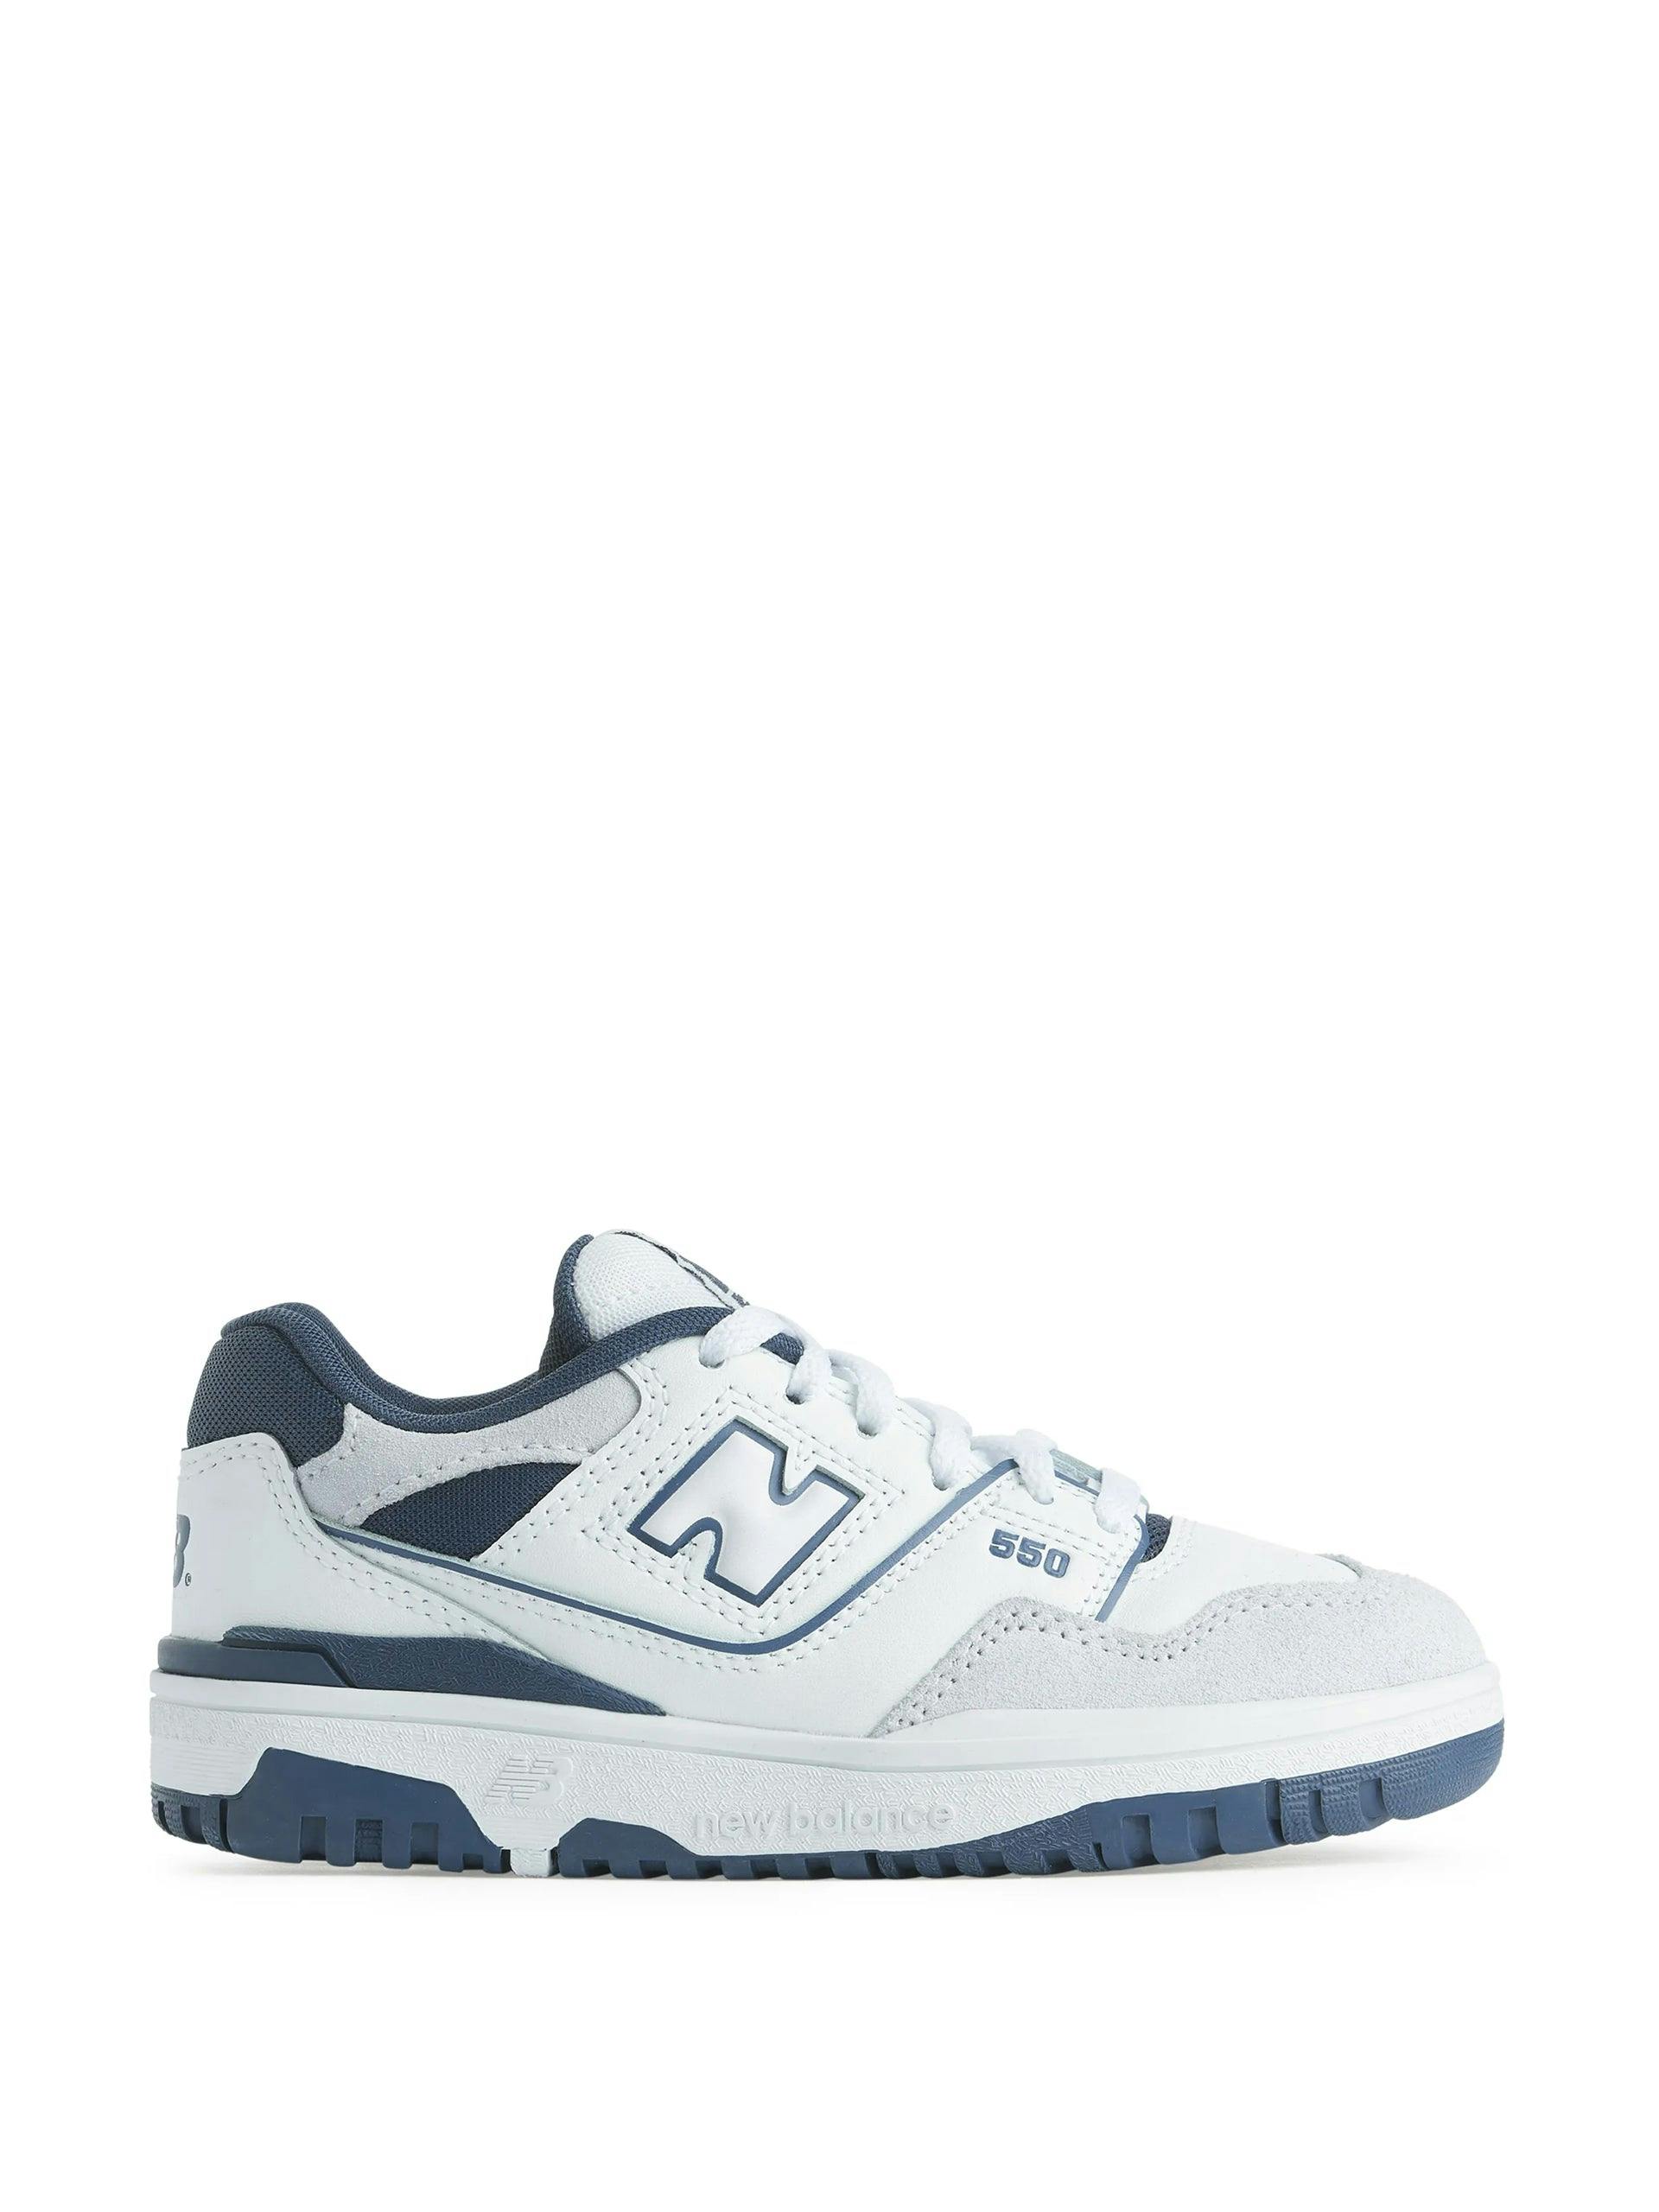 550 youth trainers in white and navy